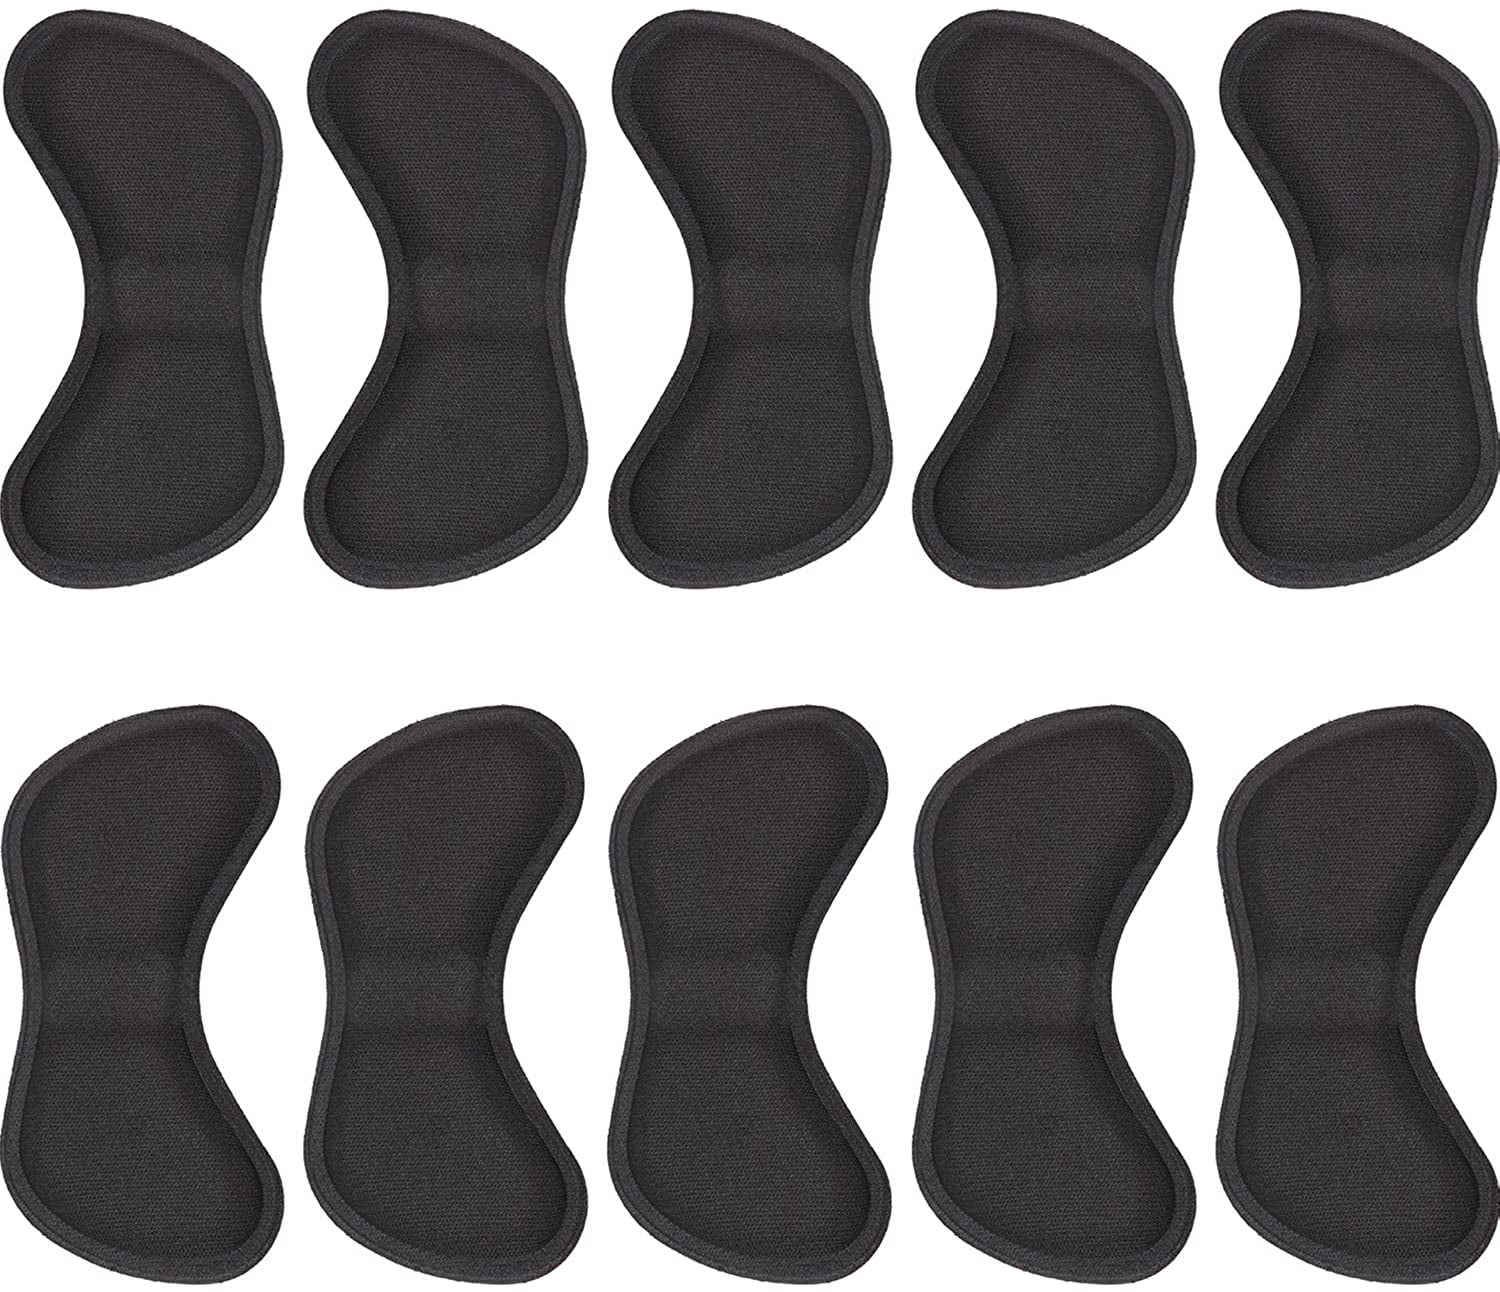 5 Pairs Heel Grip Liner Self Adhesive Shoe Insoles Cushion Pads Stickers Foot 